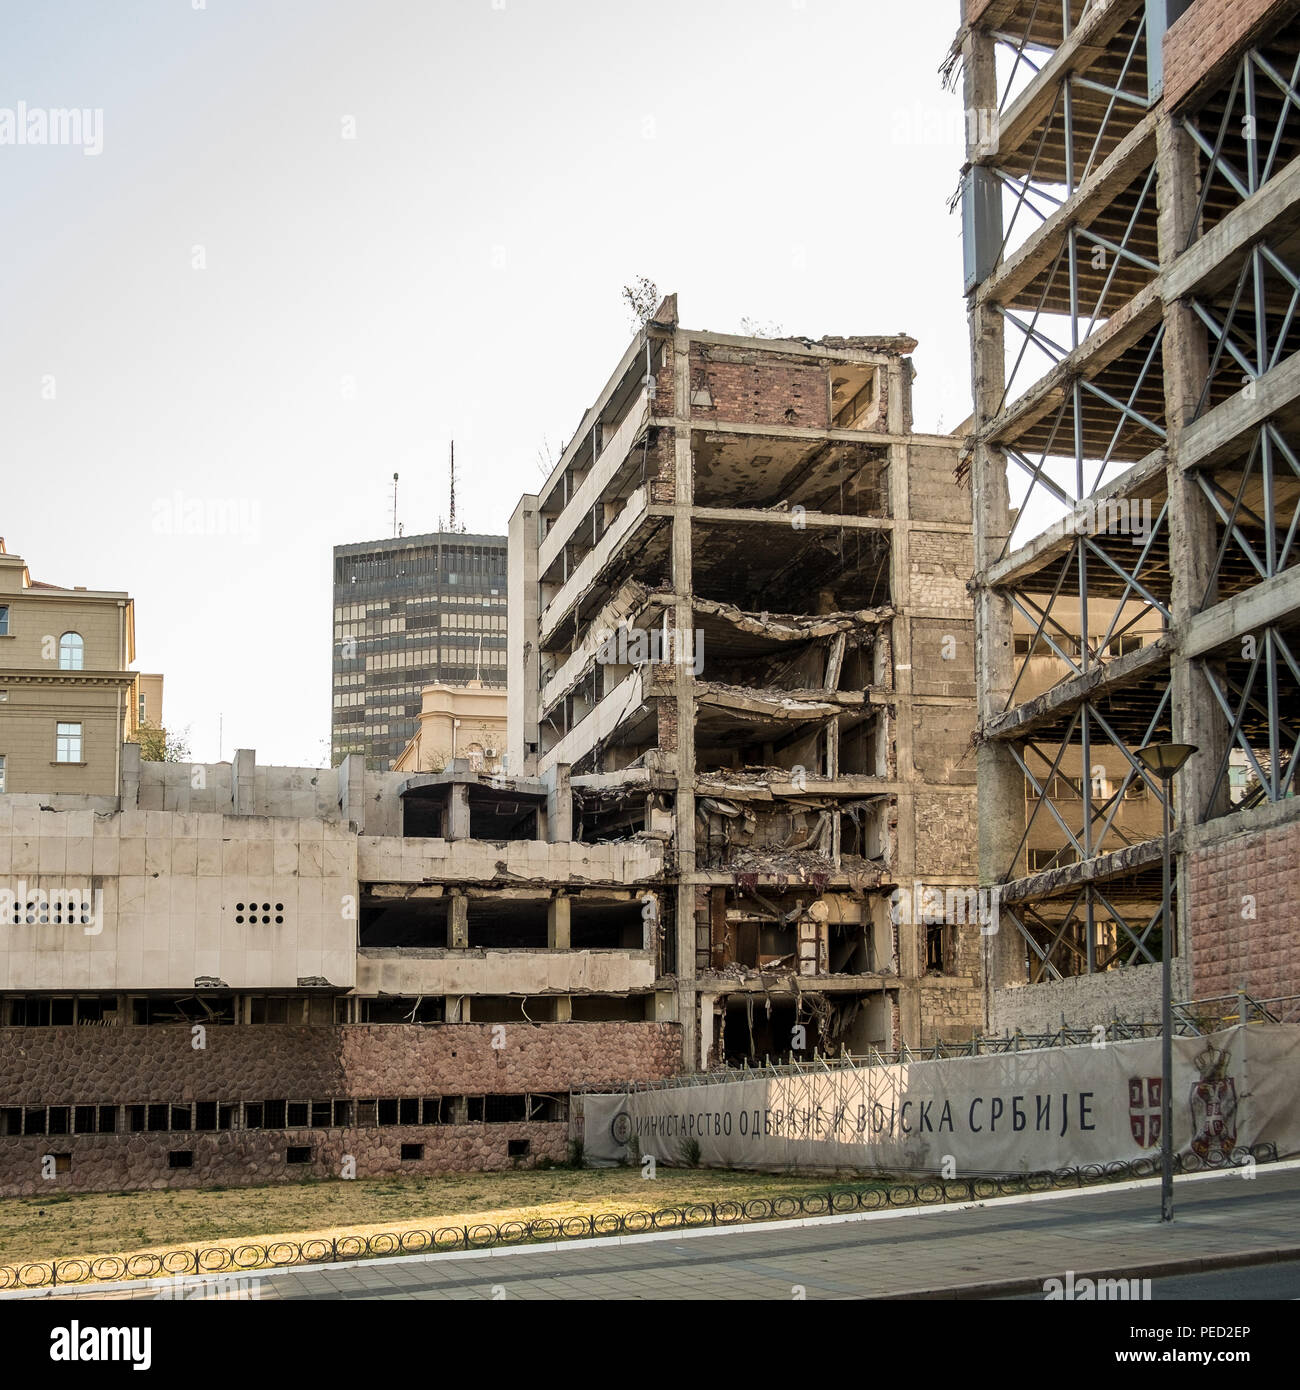 Belgrade, Serbia. August 27, 2017. General Armed Force Staff Building, bombed in 1999 Balkans war, still remain destroyed as memorial. Stock Photo